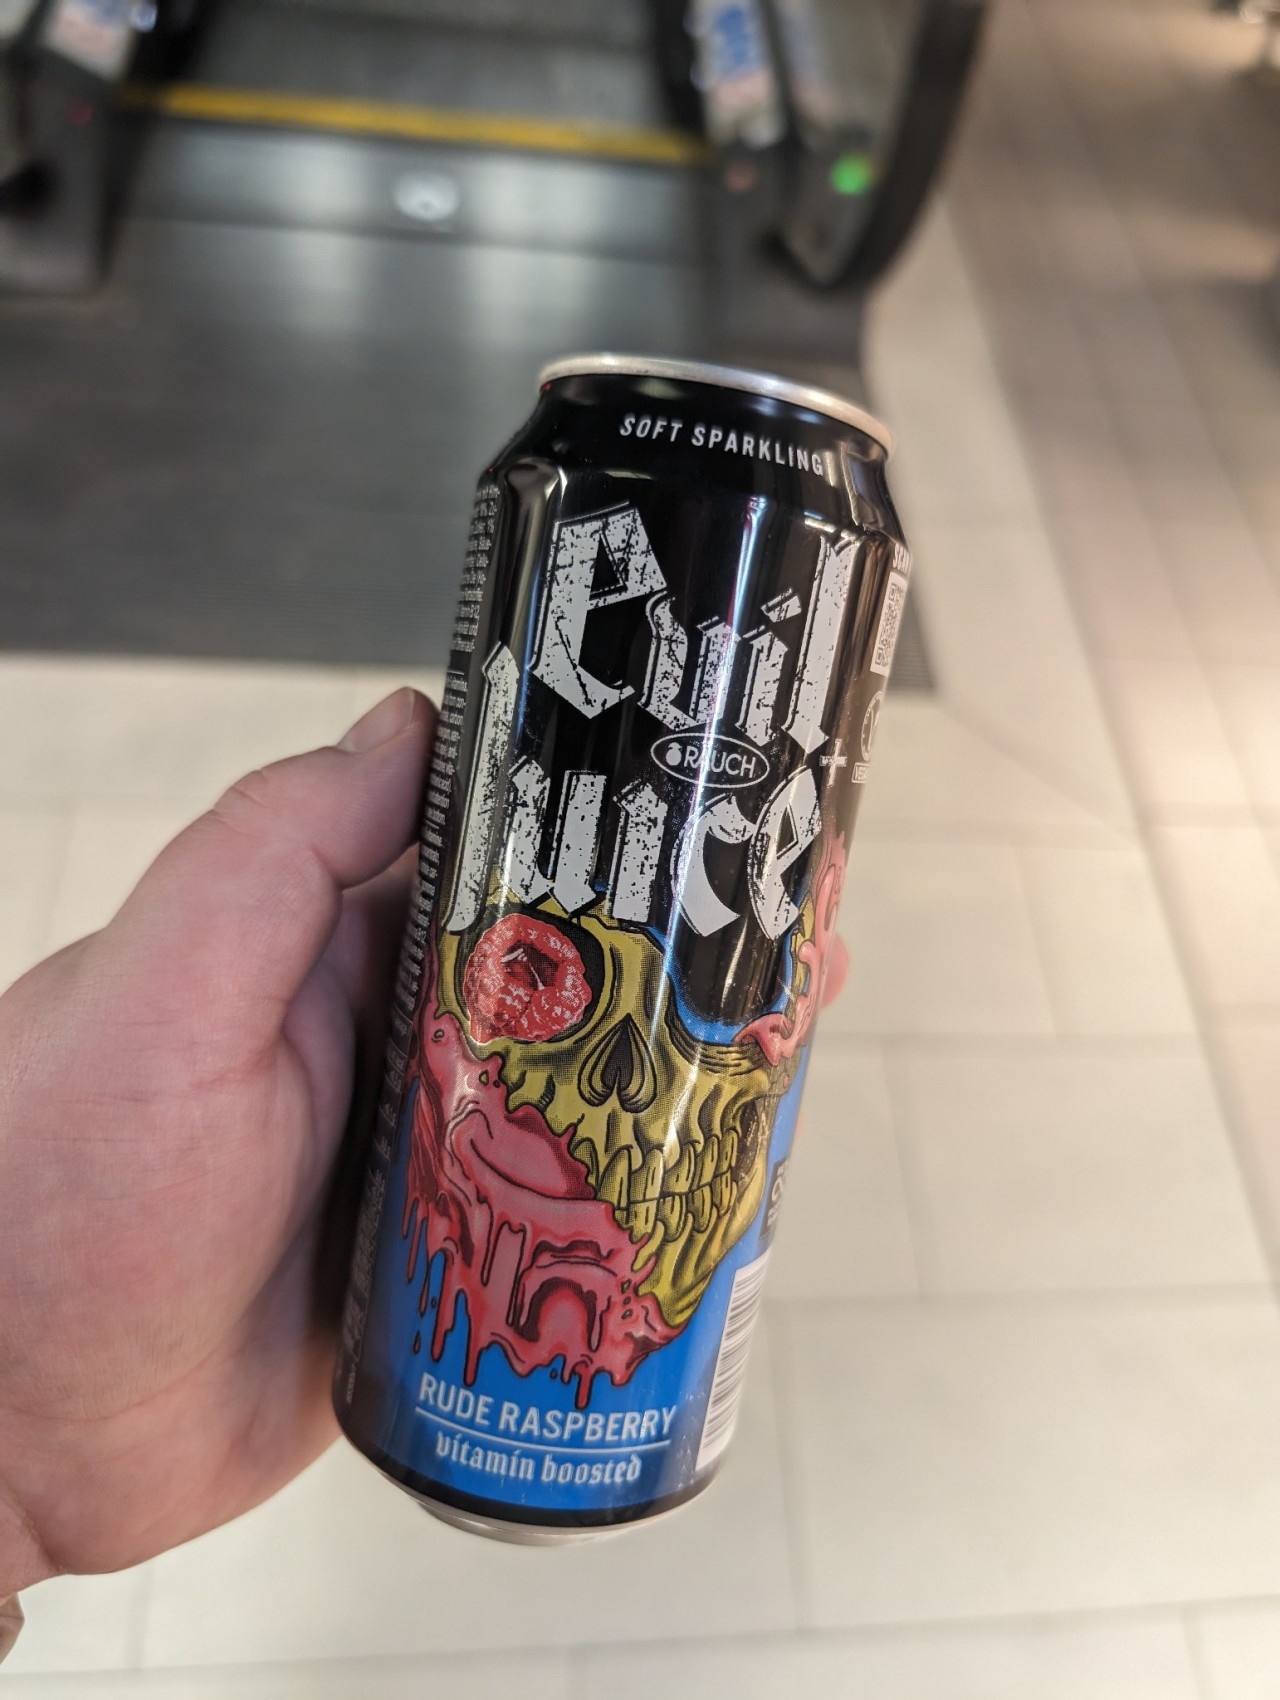 a photo of a drink can in my hand, the drink is called "evil juice, rude raspberry"